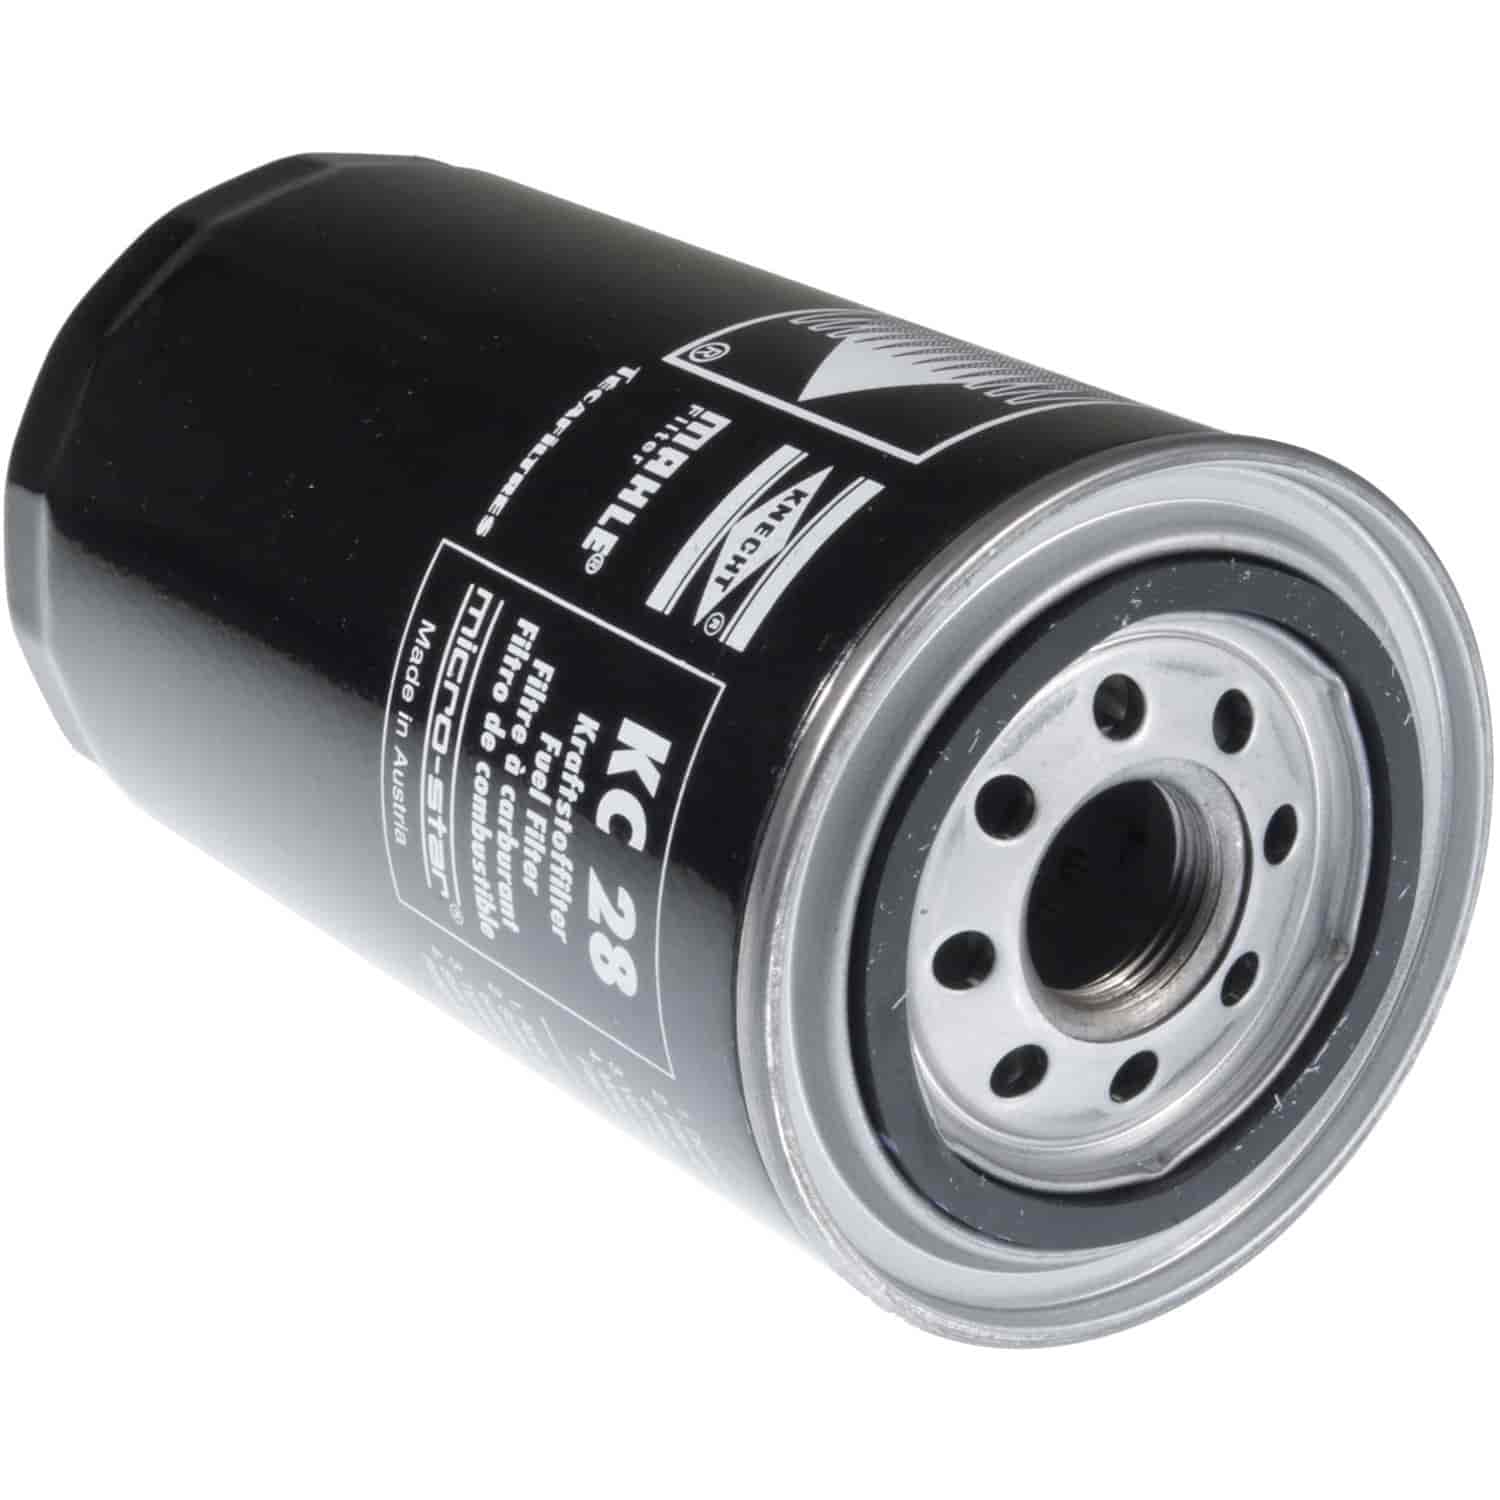 Mahle Fuel Filter Various Heavy Duty Applications